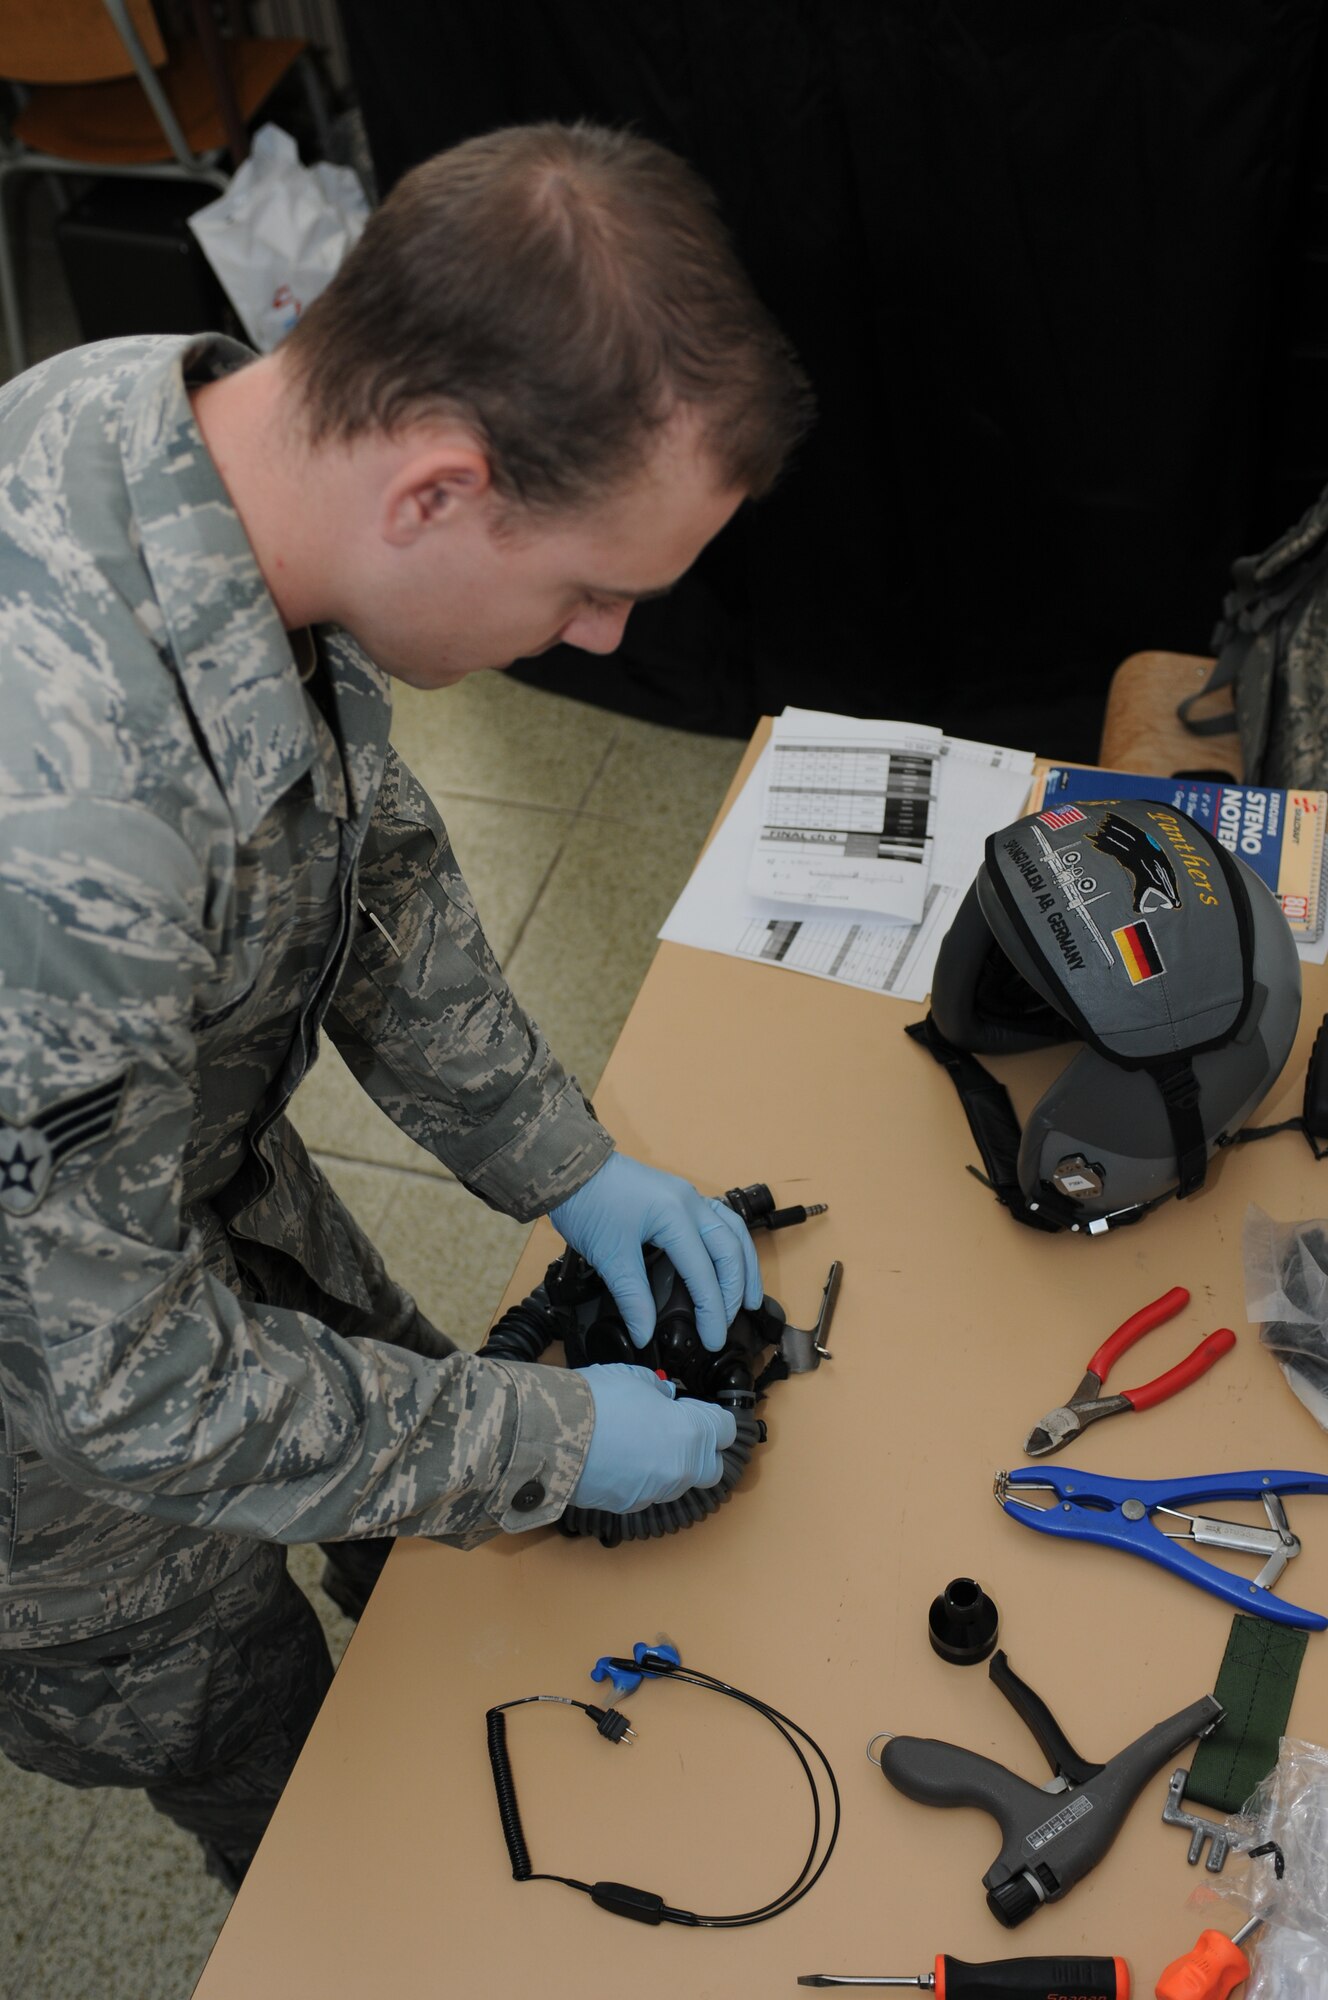 NAMEST AIR BASE, Czech Republic -- Senior Airman Brandon Keiper, 52nd Operations Support Squadron flight crew equipment maintainer, takes apart a pilot's helmet for inspection Sept. 10, during Ramstein Rover 2012 here. Flight crew equiment maintainers must check equipment every 30 days to ensure it is suitable for flying operations. RARO 12 is a NATO partnership building exercise invlolving more than 16 nations.A-10 Thunderbolt IIs from the 81st Fighter Squadron are providing close air support to partnering nations and practicing forward air control missions with their NATO allies in international security assistance force realistic scenarios throughtout the exercise. Participating in exercises like RARO 12 ensures effective employment of airpower in support of alliance or coalition forces while mitigating risks to civilians in contingency operations. (U.S. Air Force photo by Senior Airman Natasha Stannard/Released)